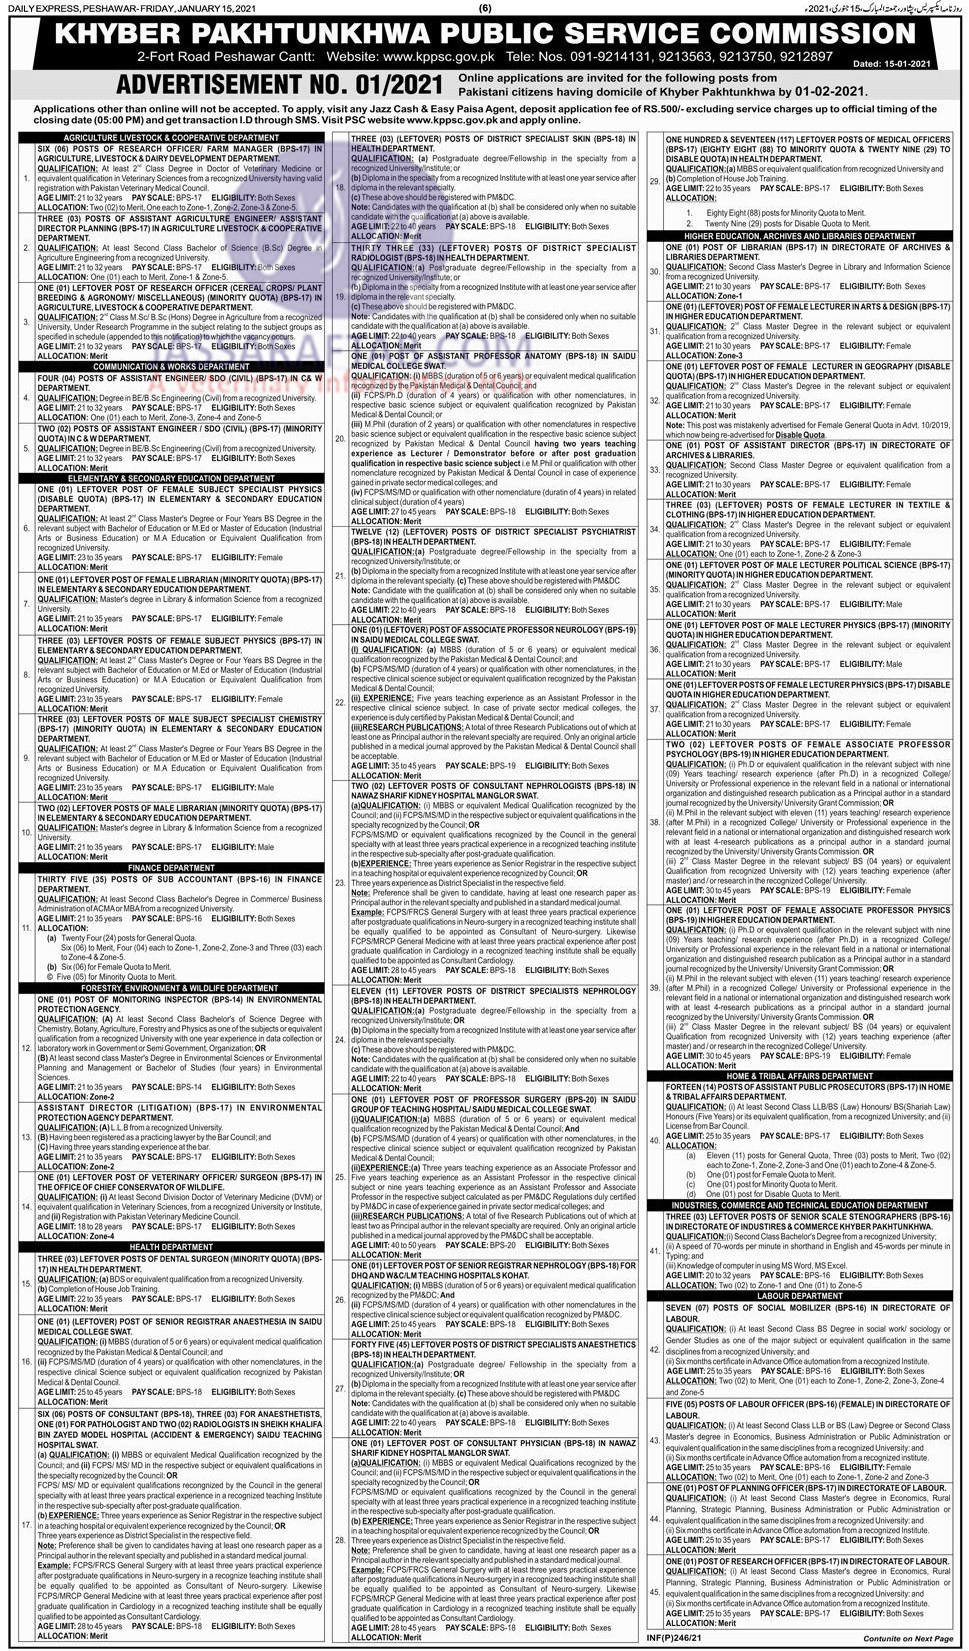 Jobs for veterinary professionals through KPPSC